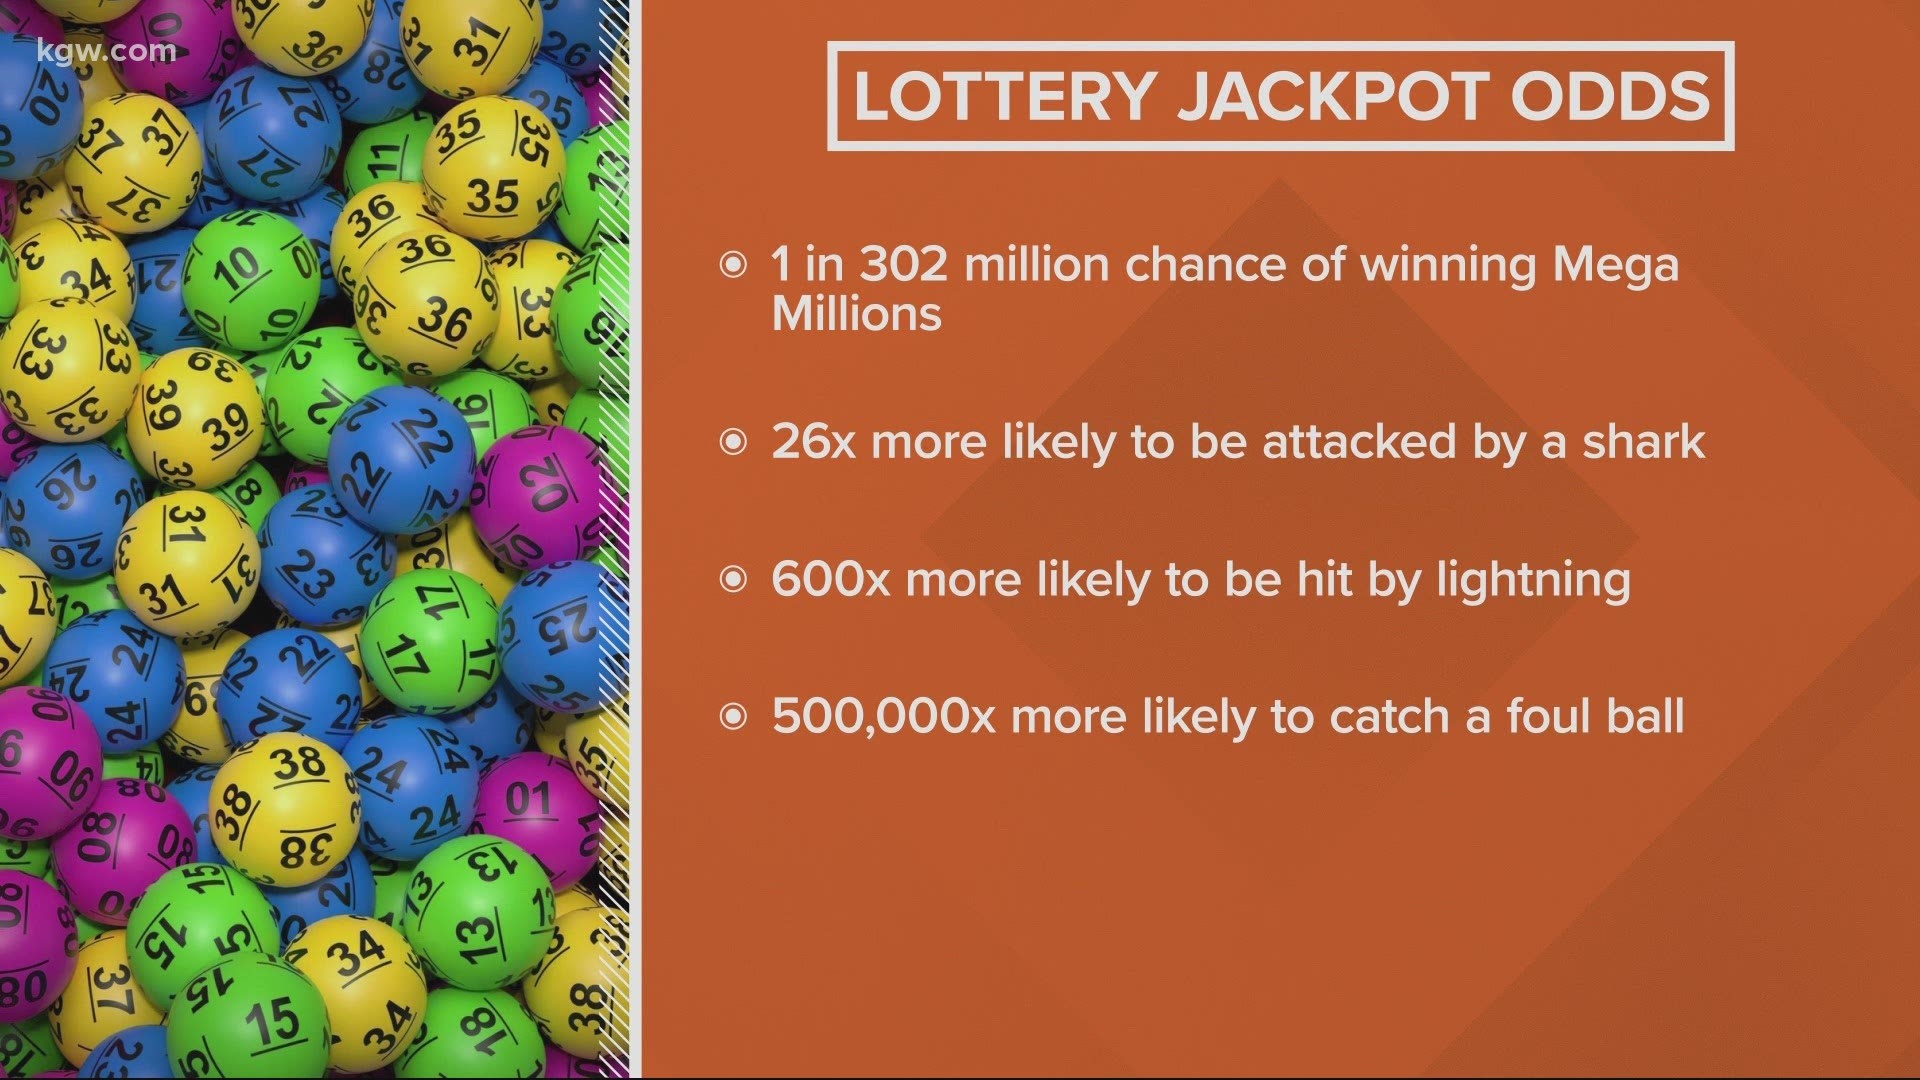 Two of the country's most popular lottery games have jackpots that are approaching all-time highs. What are your actual chances of winning?